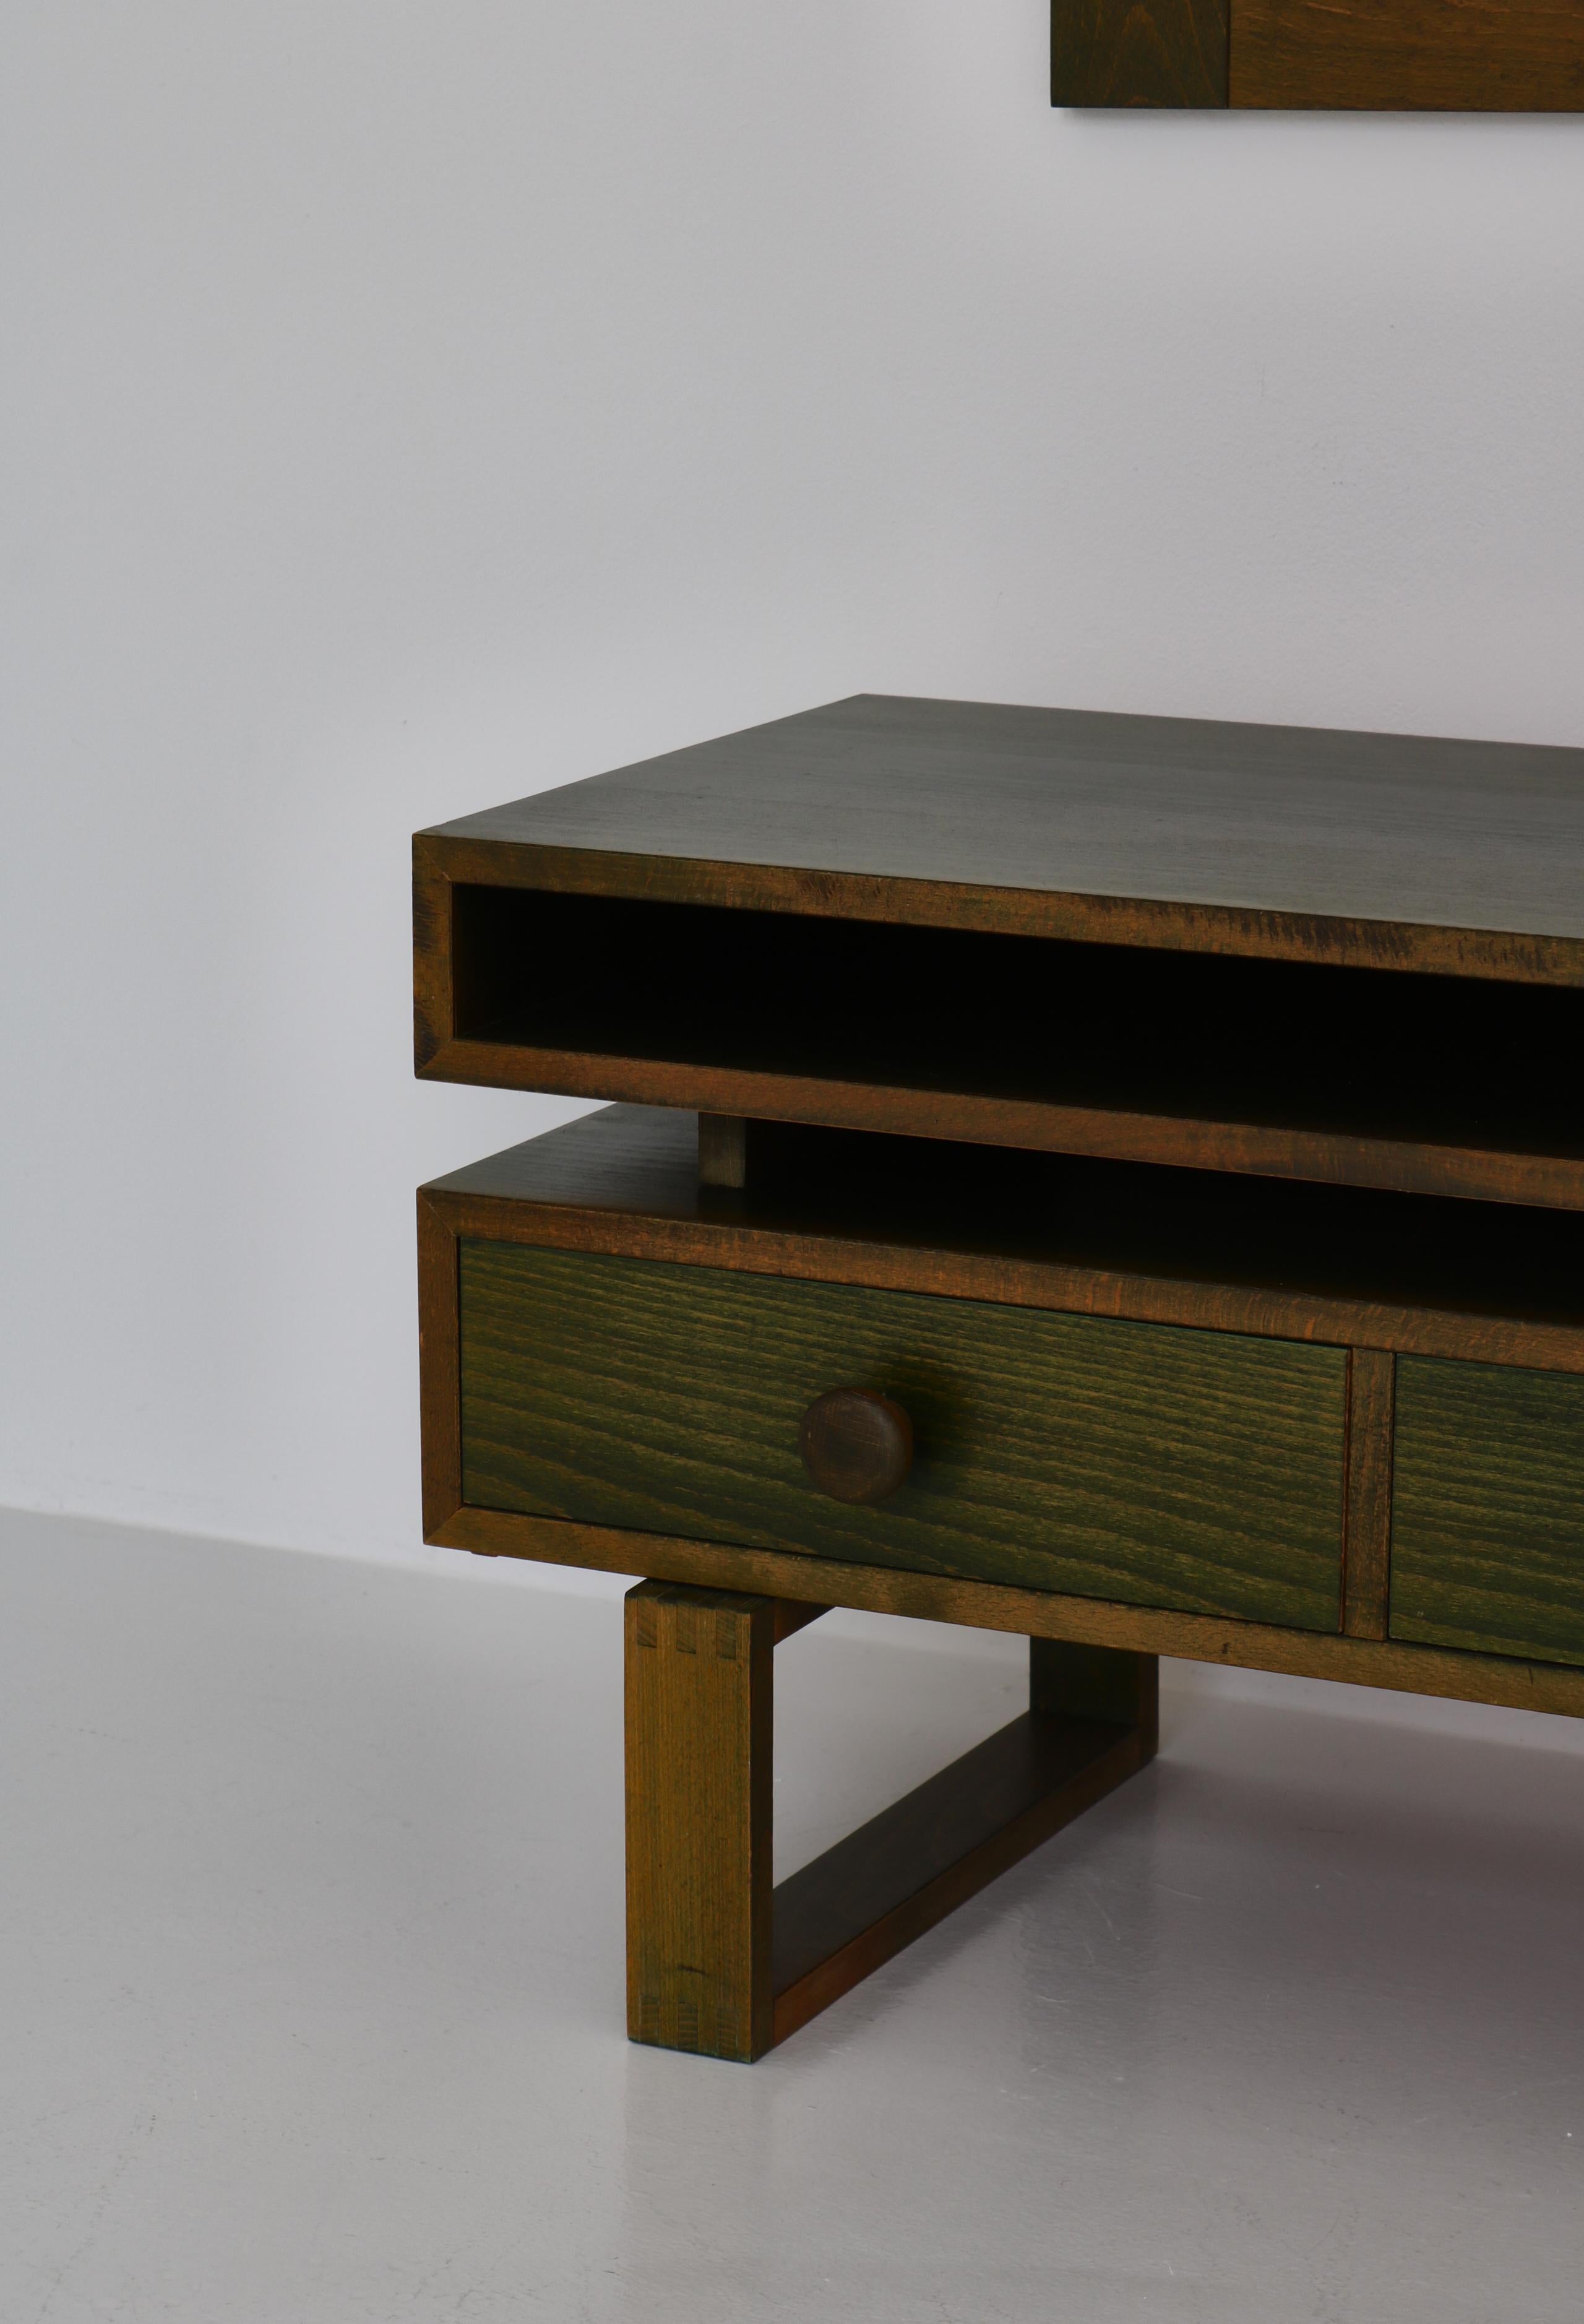 Scandinavian Modern Chest & Mirror in Green Stained Pinewood, Denmark, 1970s For Sale 6